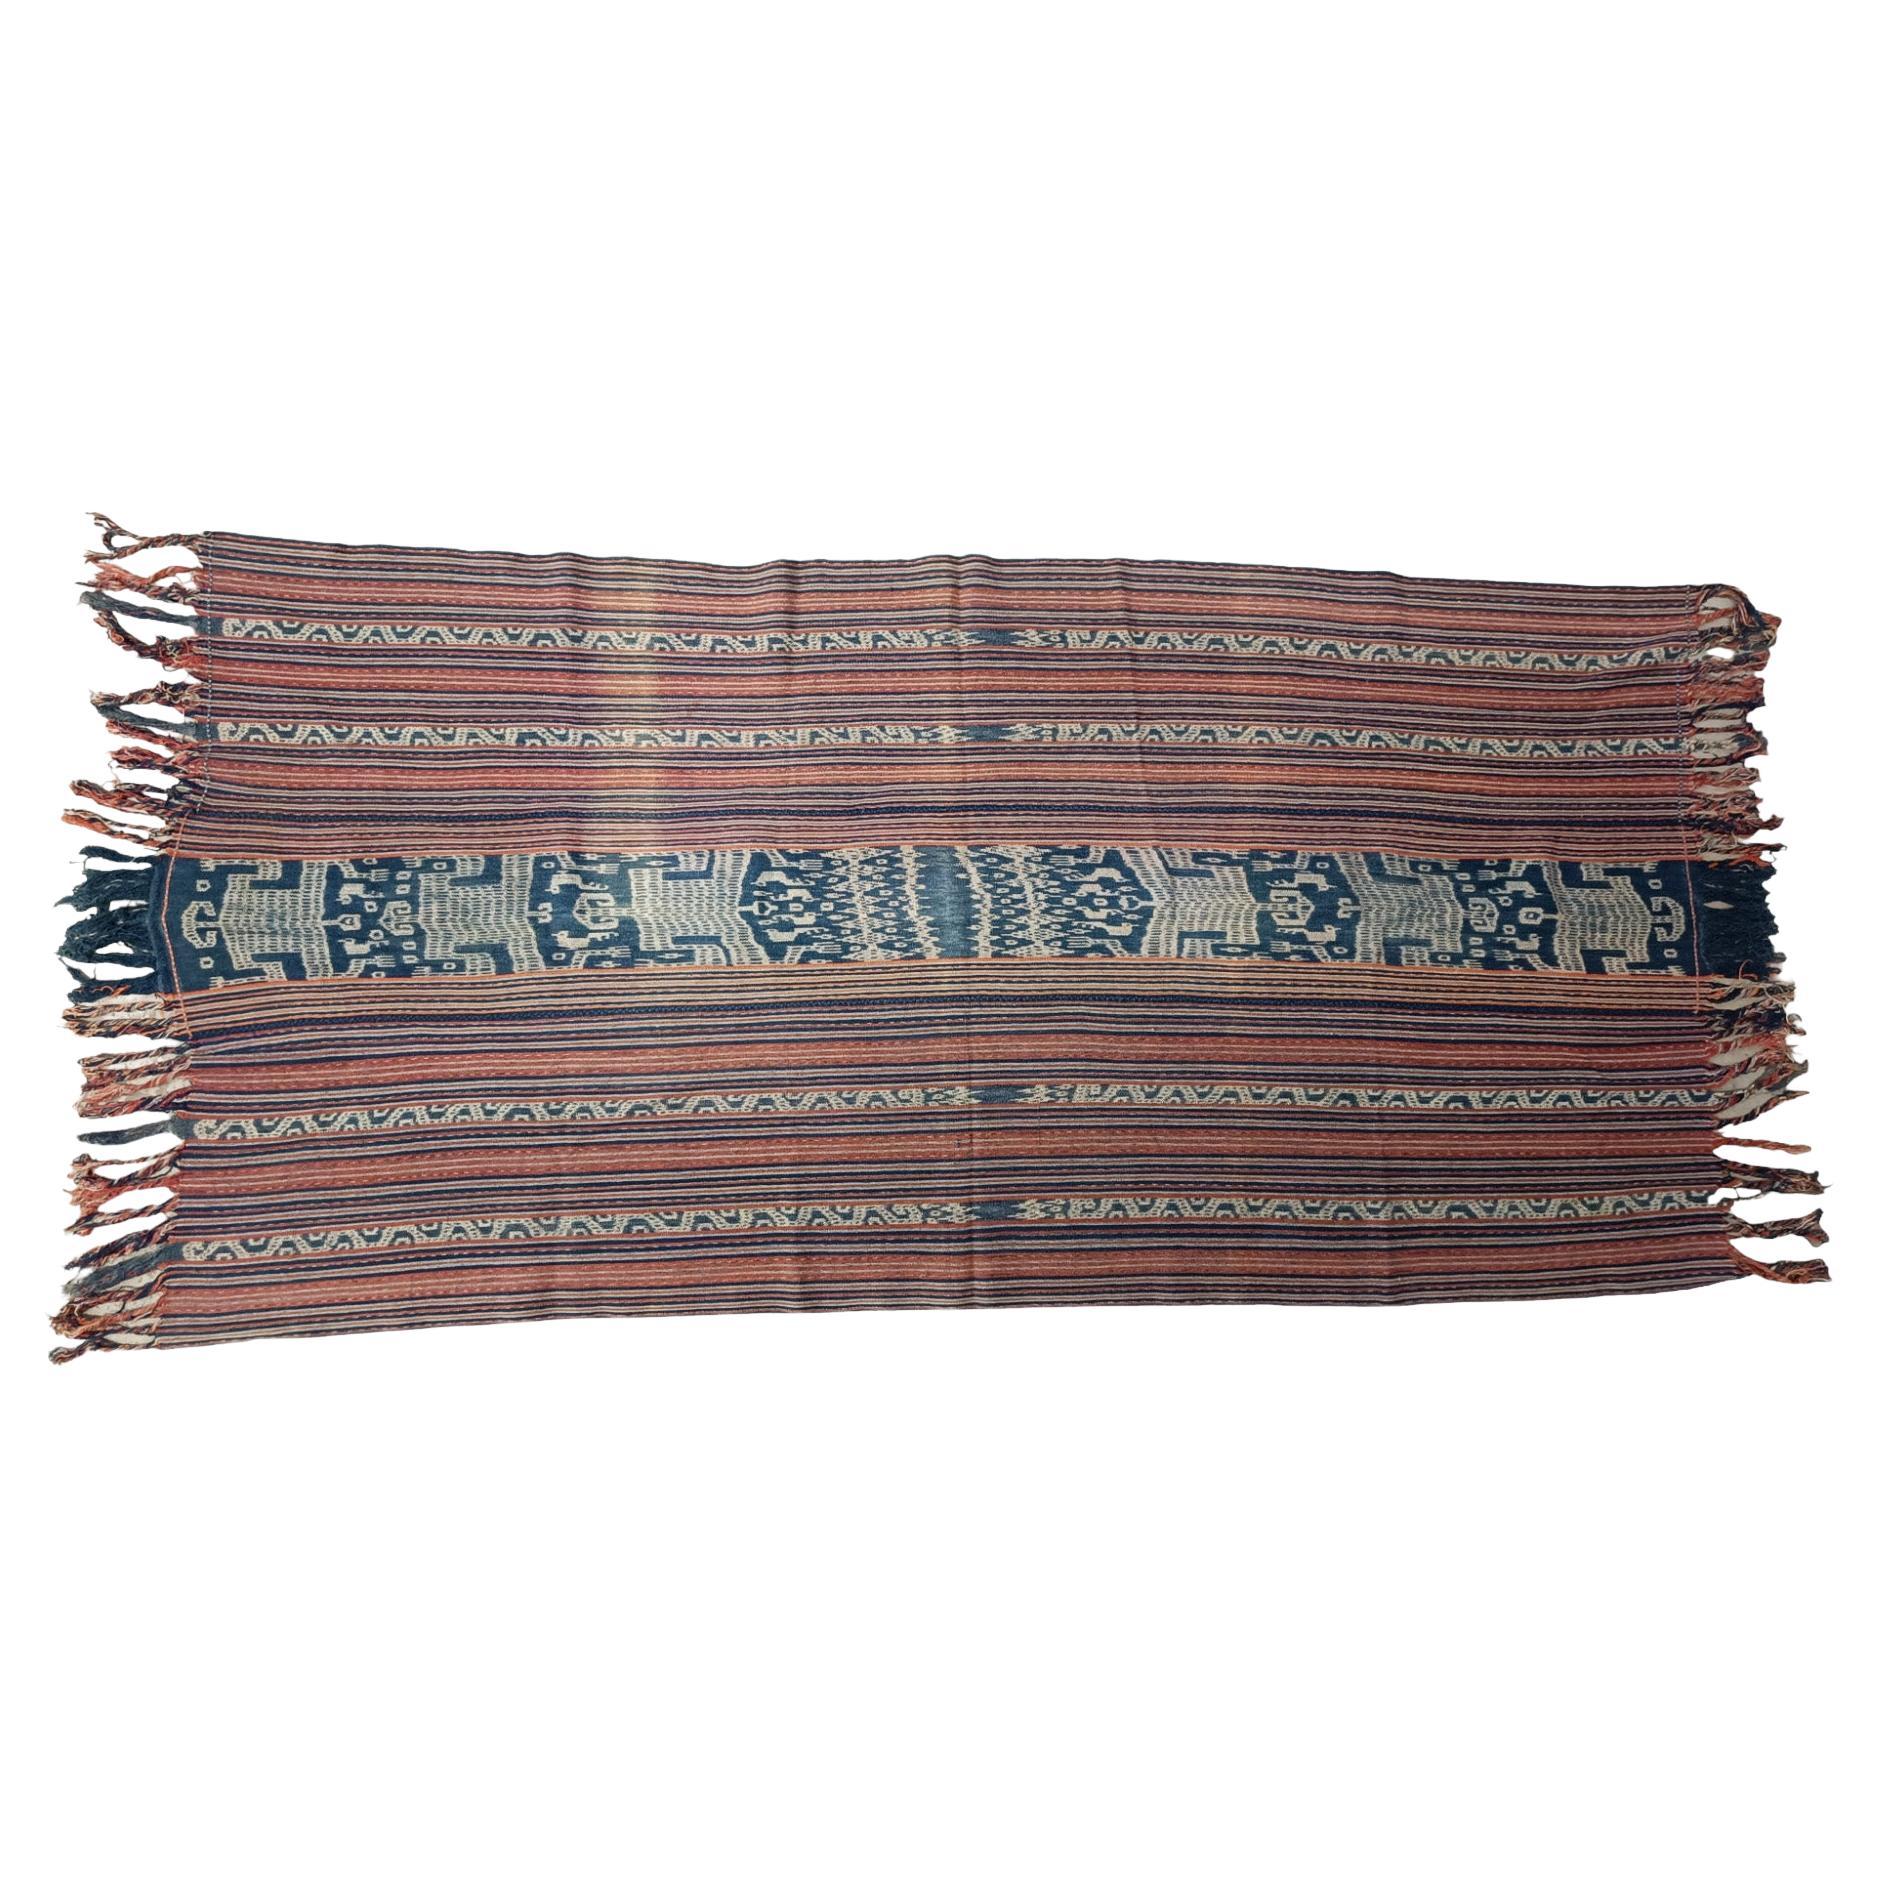 Vintage Ikat Cloth Timor Indonesia Asian Textiles Home Decor For Sale